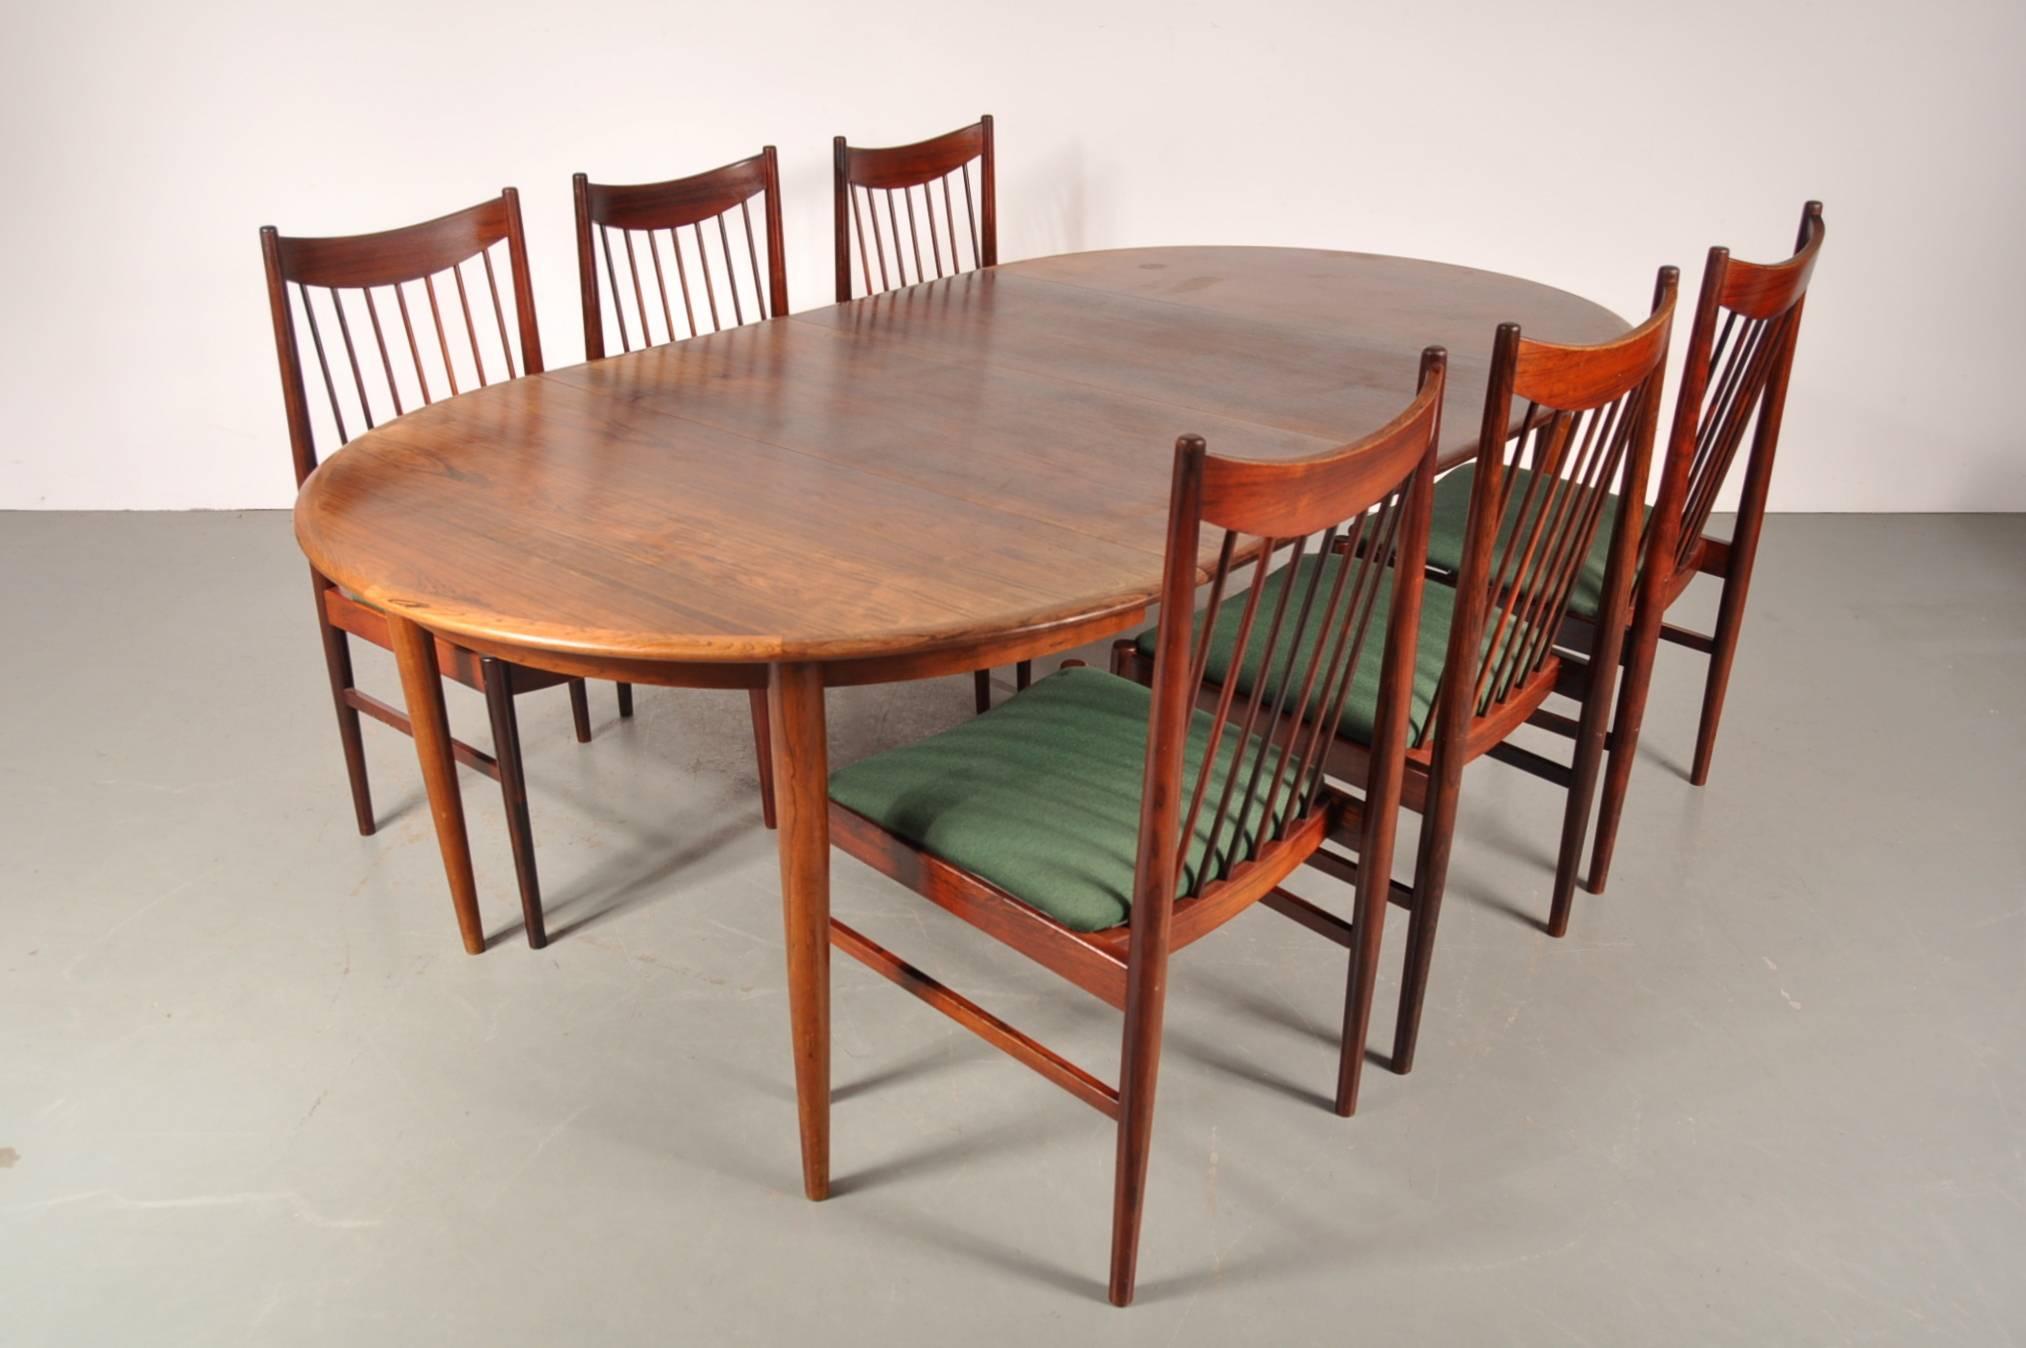 Beautiful dining room set designed by Arne Vodder, manufactured by Sibast in Denmark, circa 1960.

This luxurious set contains one extendable dining table and six dining chairs. The table is completely made of the highest quality rosewood and has